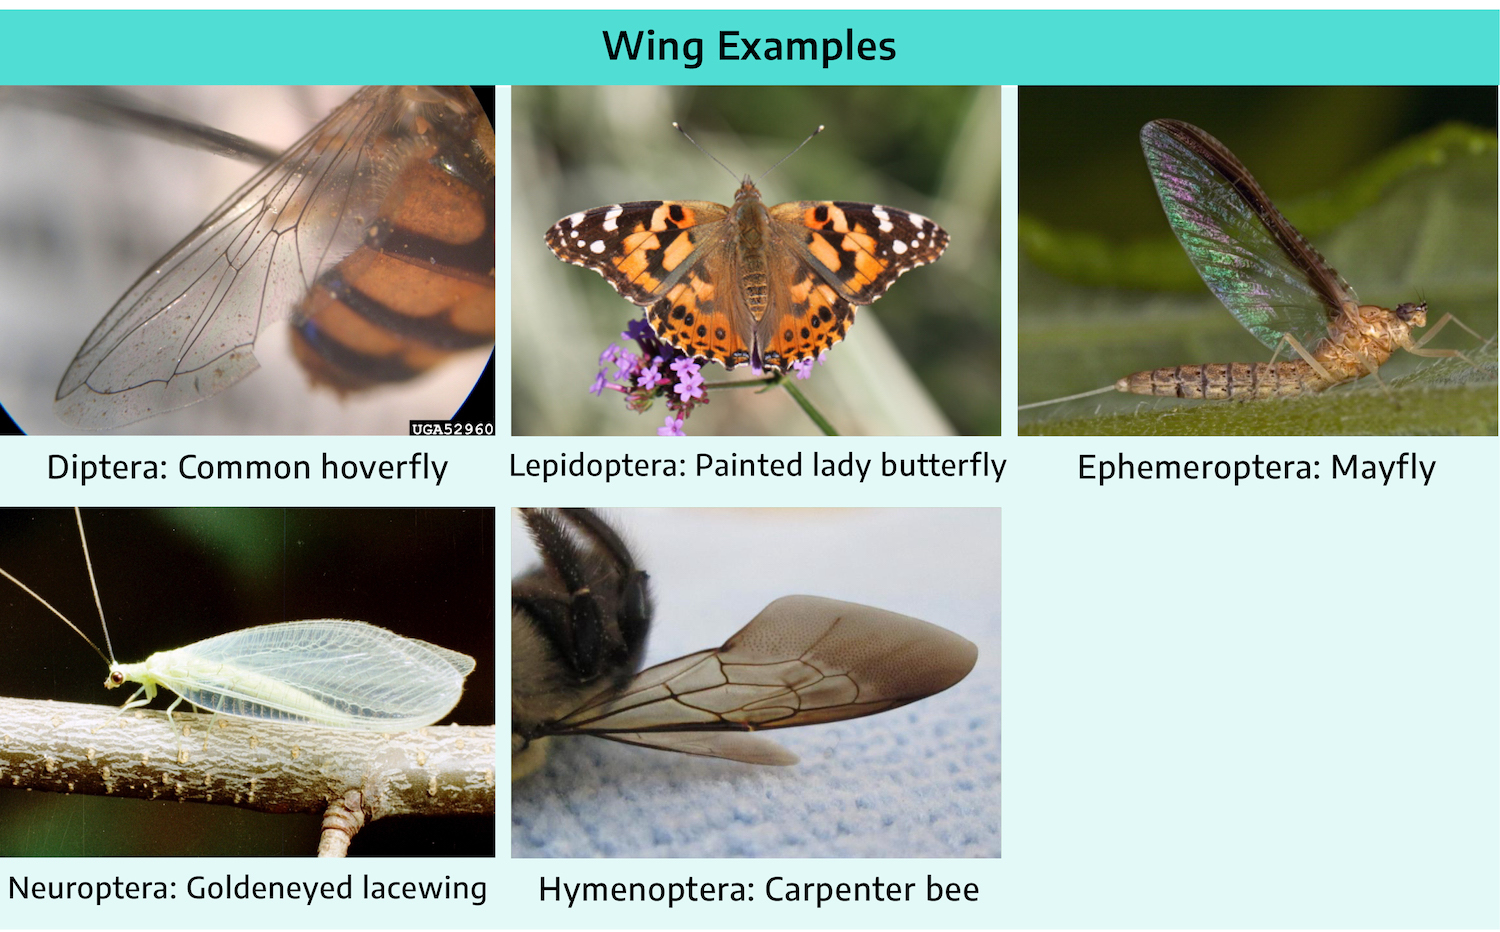 Five photographs of wing examples on different insects. First is a common hoverfly, very small in size, showing the diptera wings; long as the body, thin, see through. Next is a painted lady butterfly showing the lepidoptera; wide patterned wings good for slow flying. Next is the mayfly showing the ephemeroptera wings; long, thin, wide at the bottom into a rounded tip, iridescent wings. Next is the goldeneyed lacewing showing neuroptera wings; almost three times as large as the insect itself, white translucent, wide and round. Last is the carpenter bee showing the hymenoptera wing; small, darker colored translucent wings, about the size of the insect.